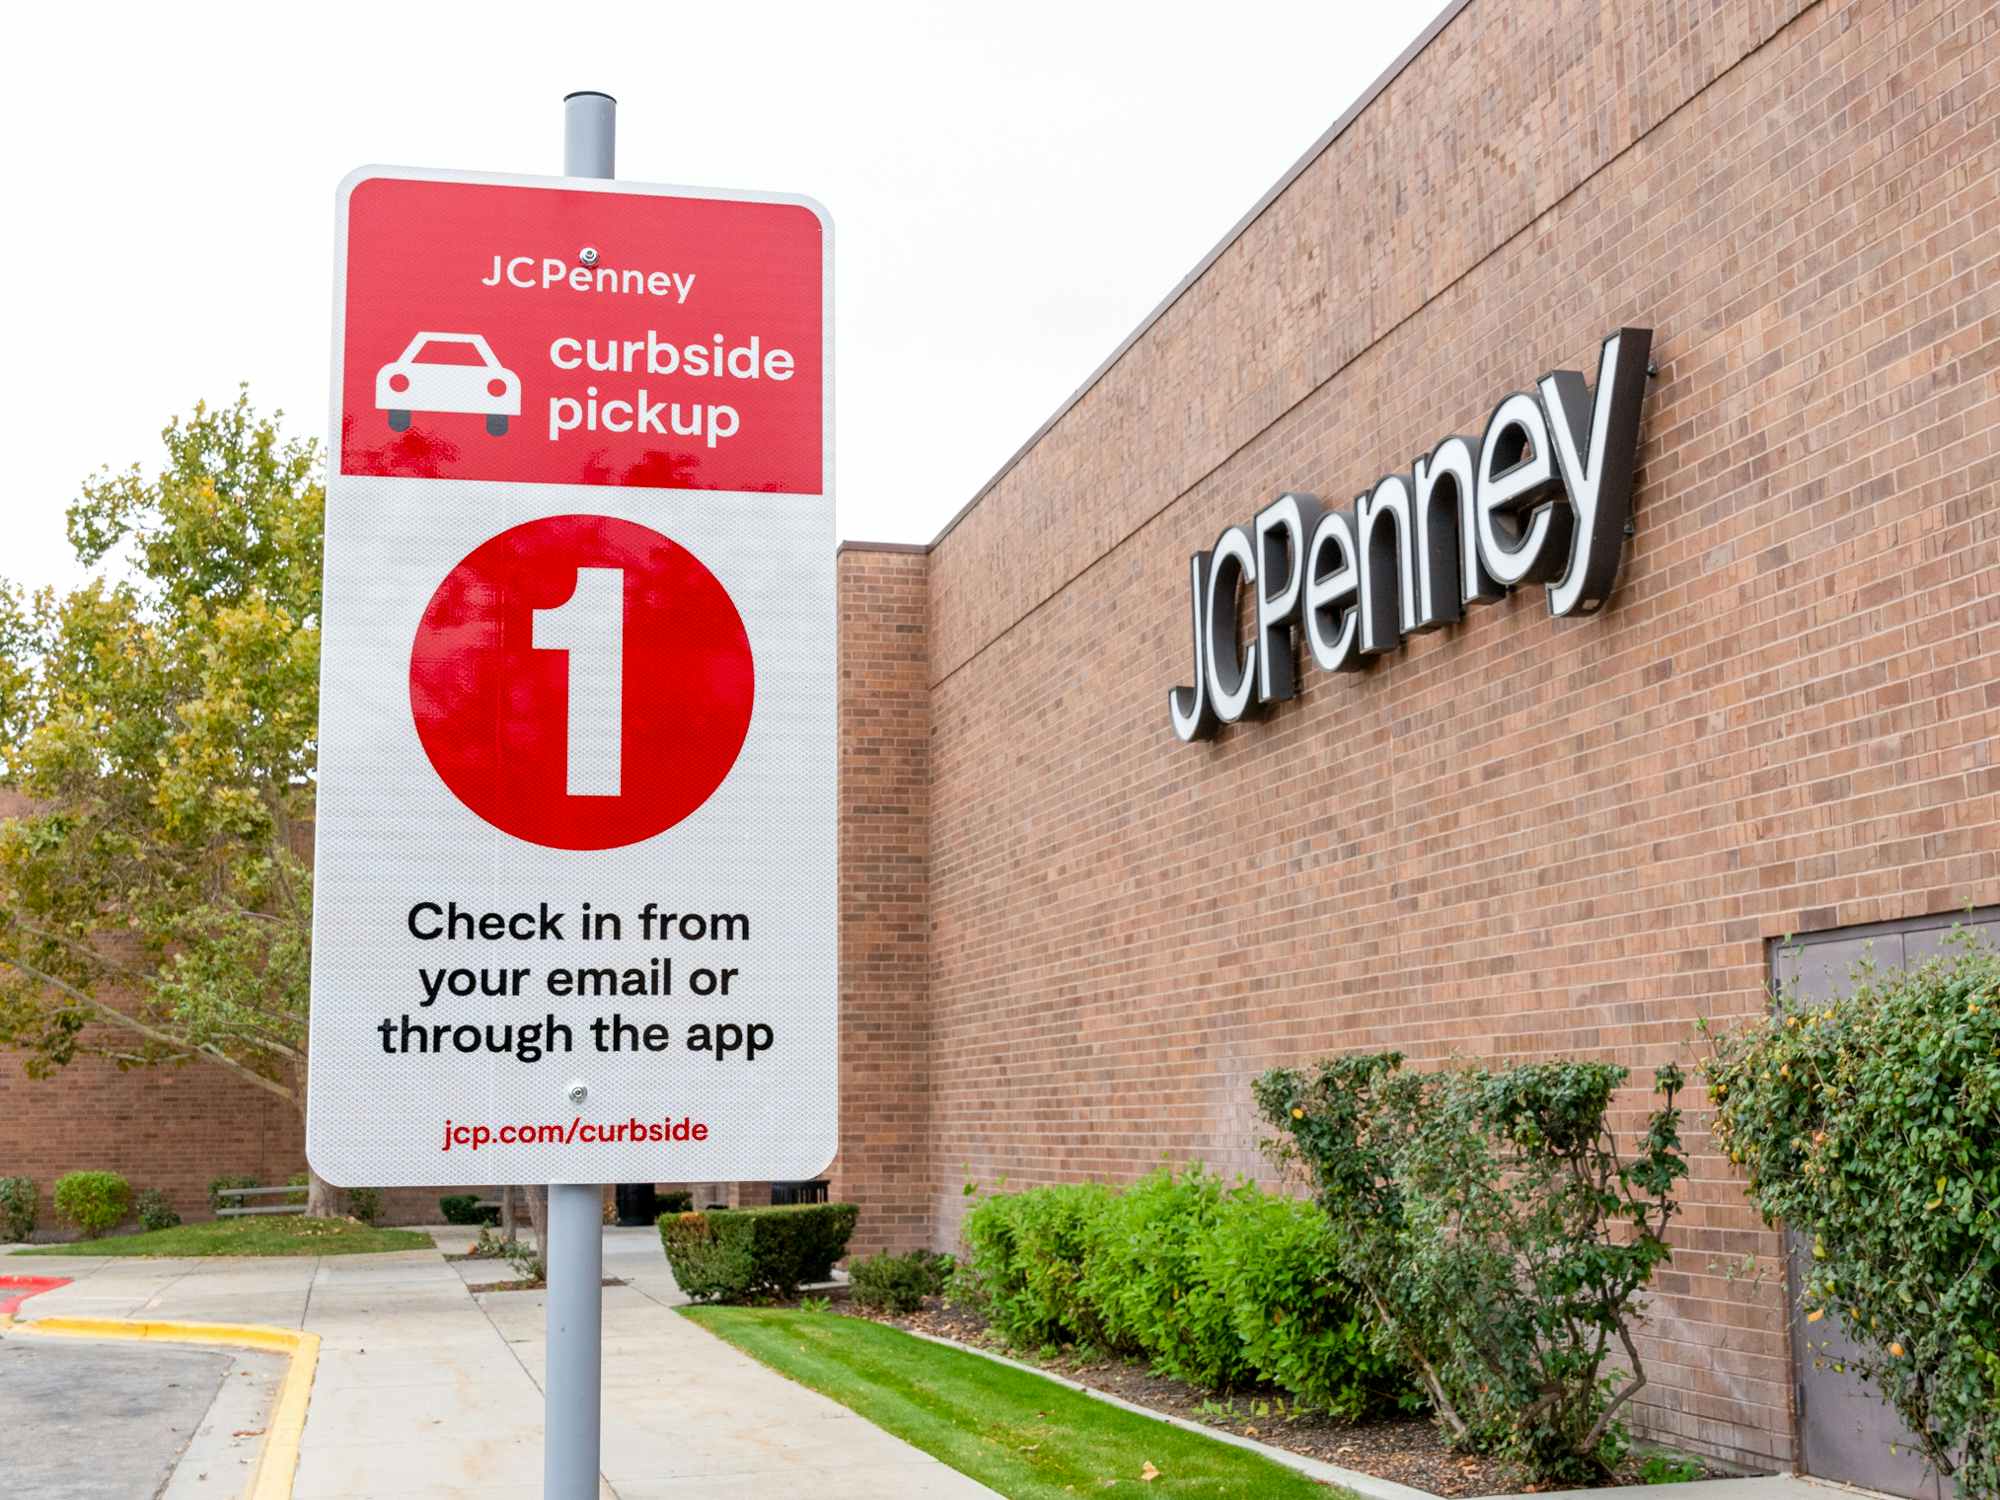 The curbside pickup sign outside of JCPenney